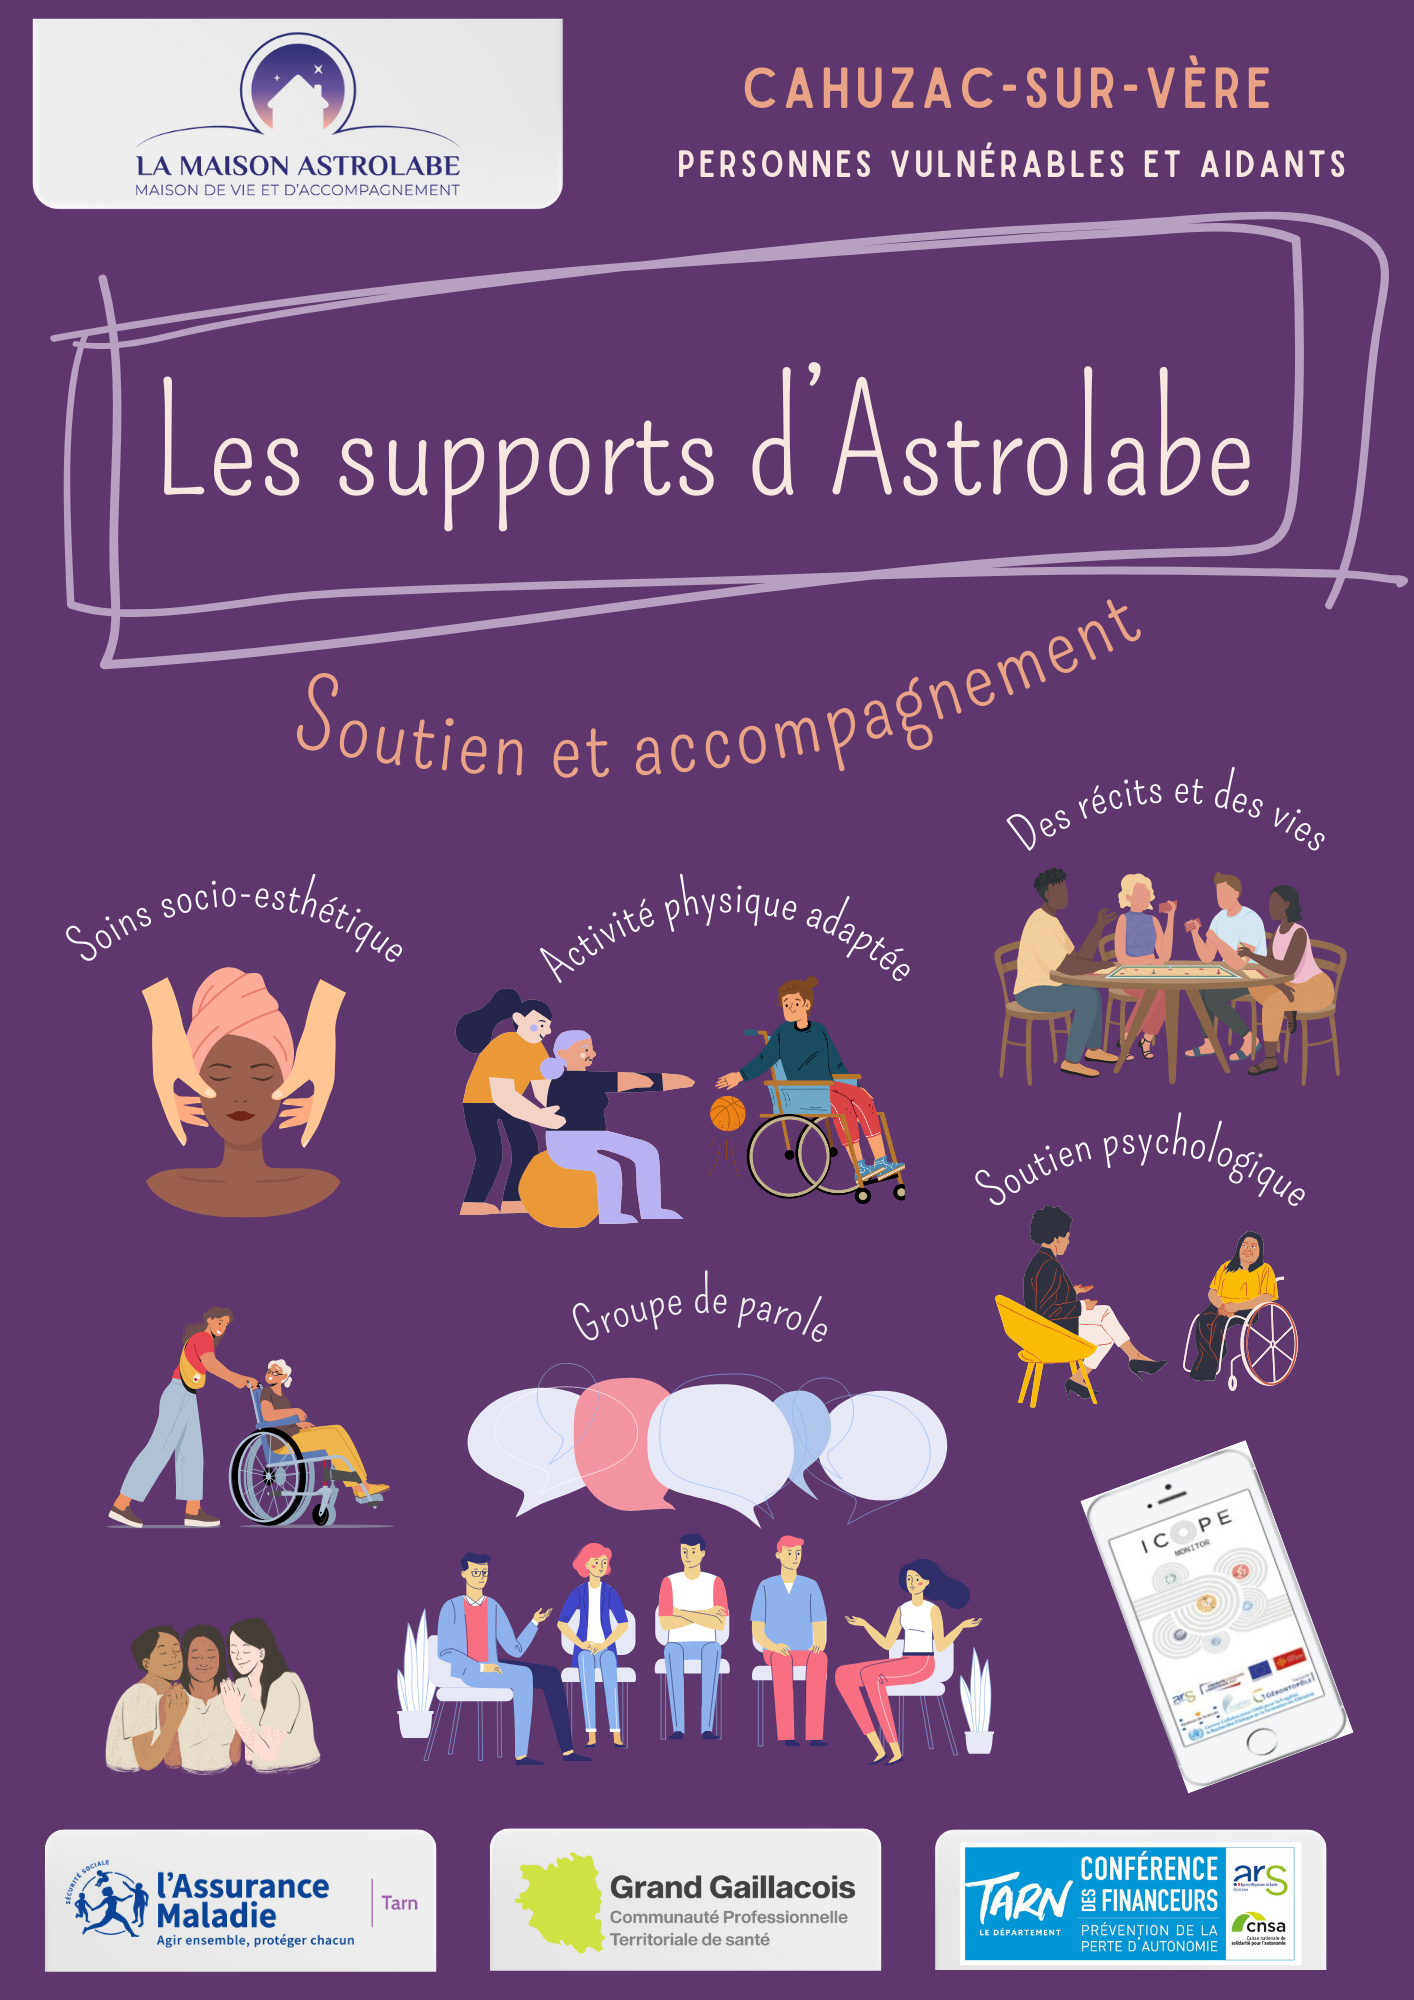 You are currently viewing Les supports d’Astrolabe